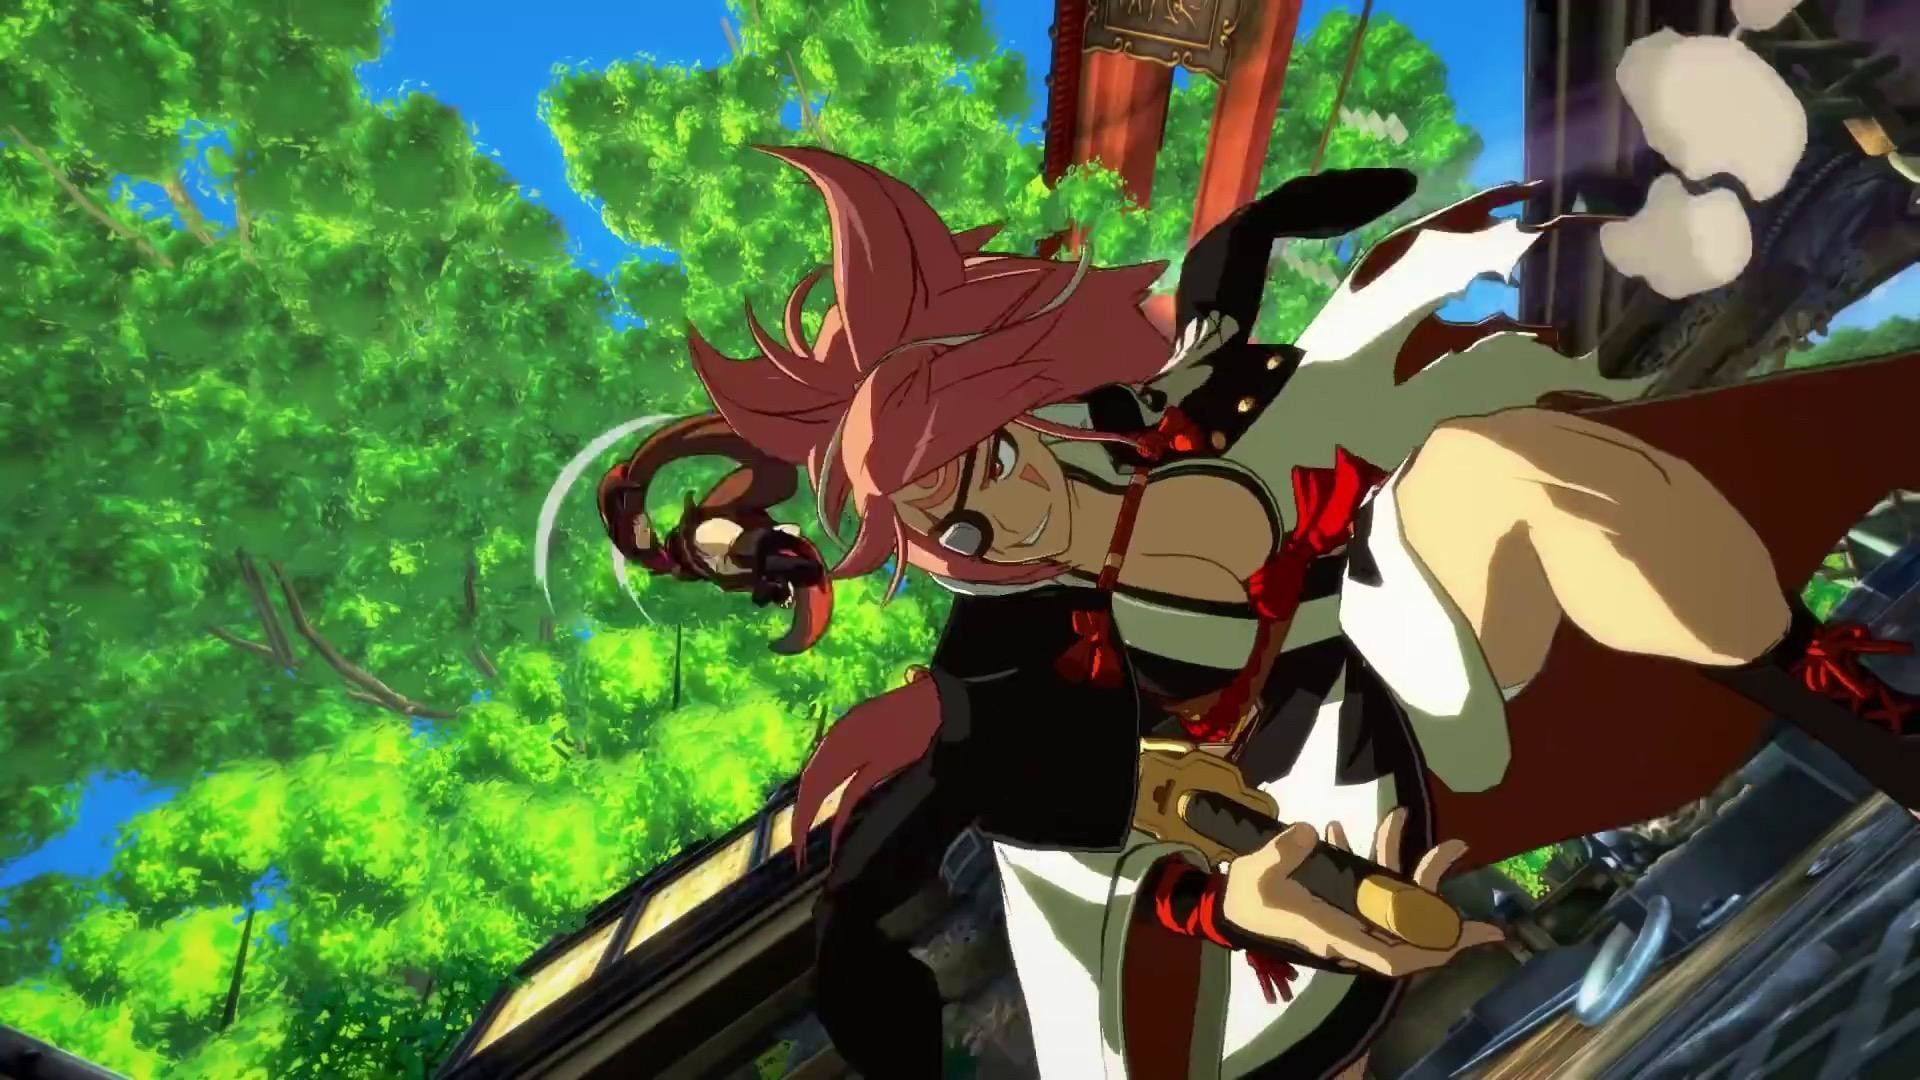 1920x1080 Image result for guilty gear rev 2 